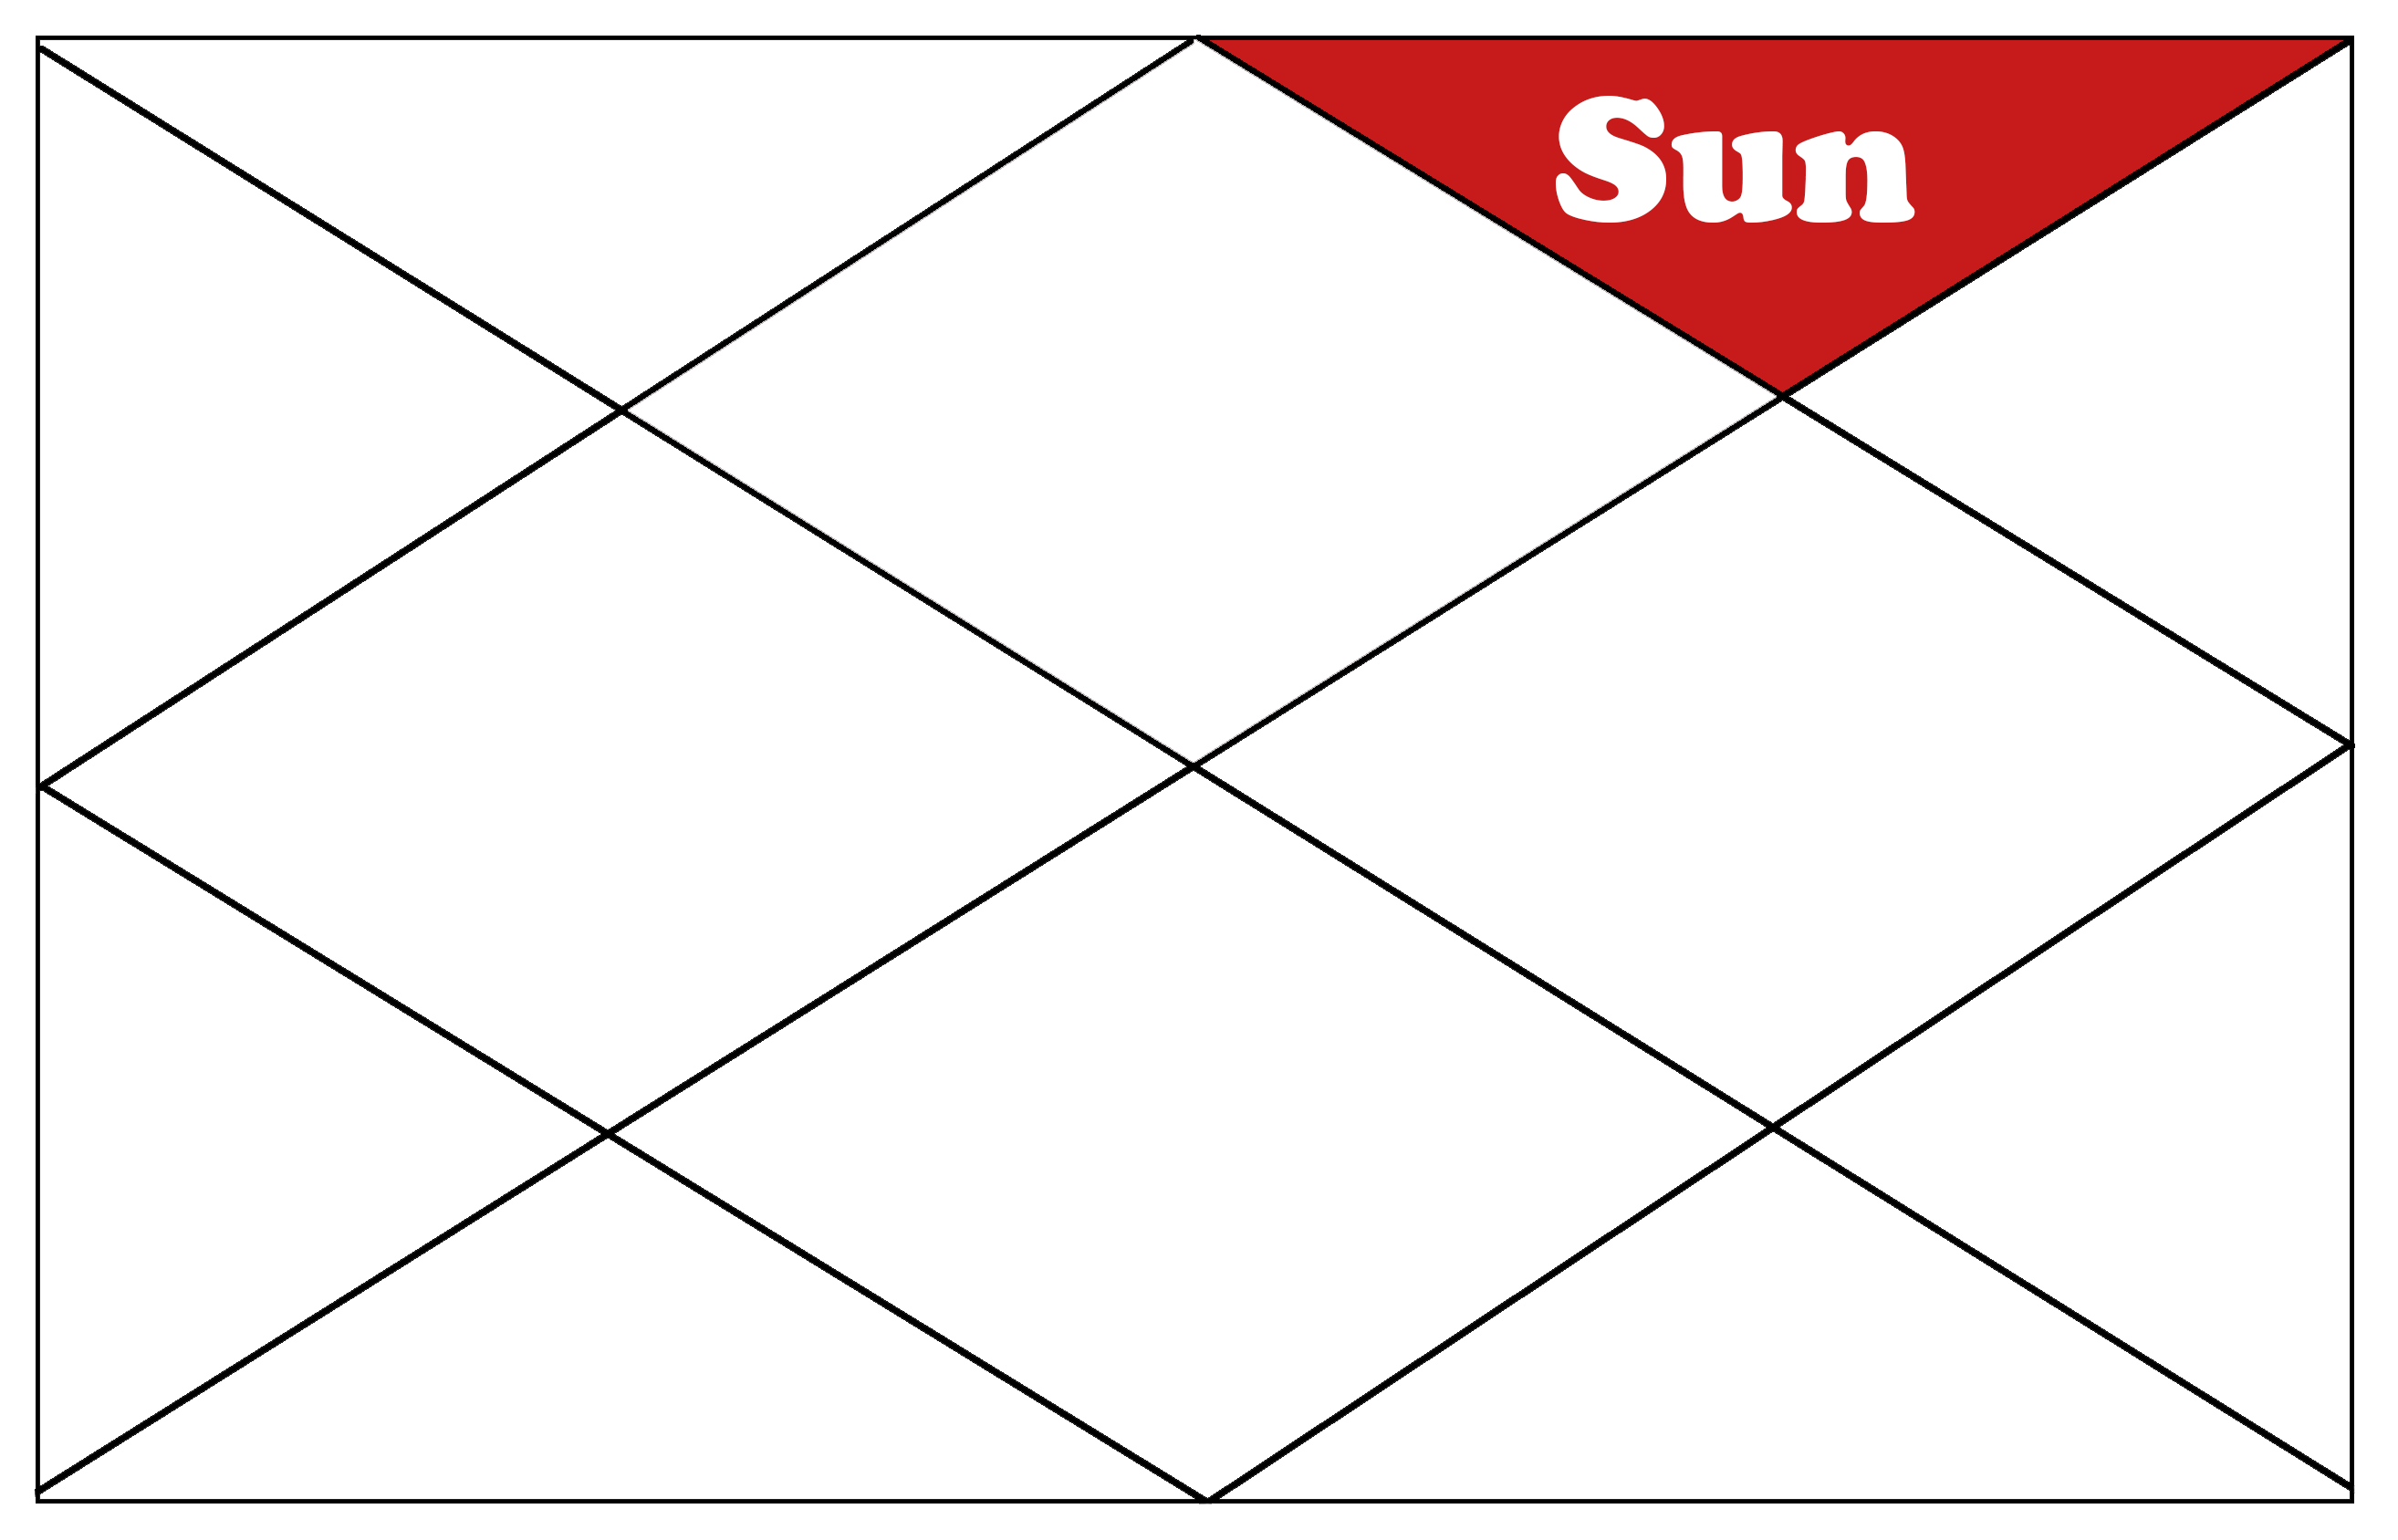 Sun in 12th House in Vedic Astrology